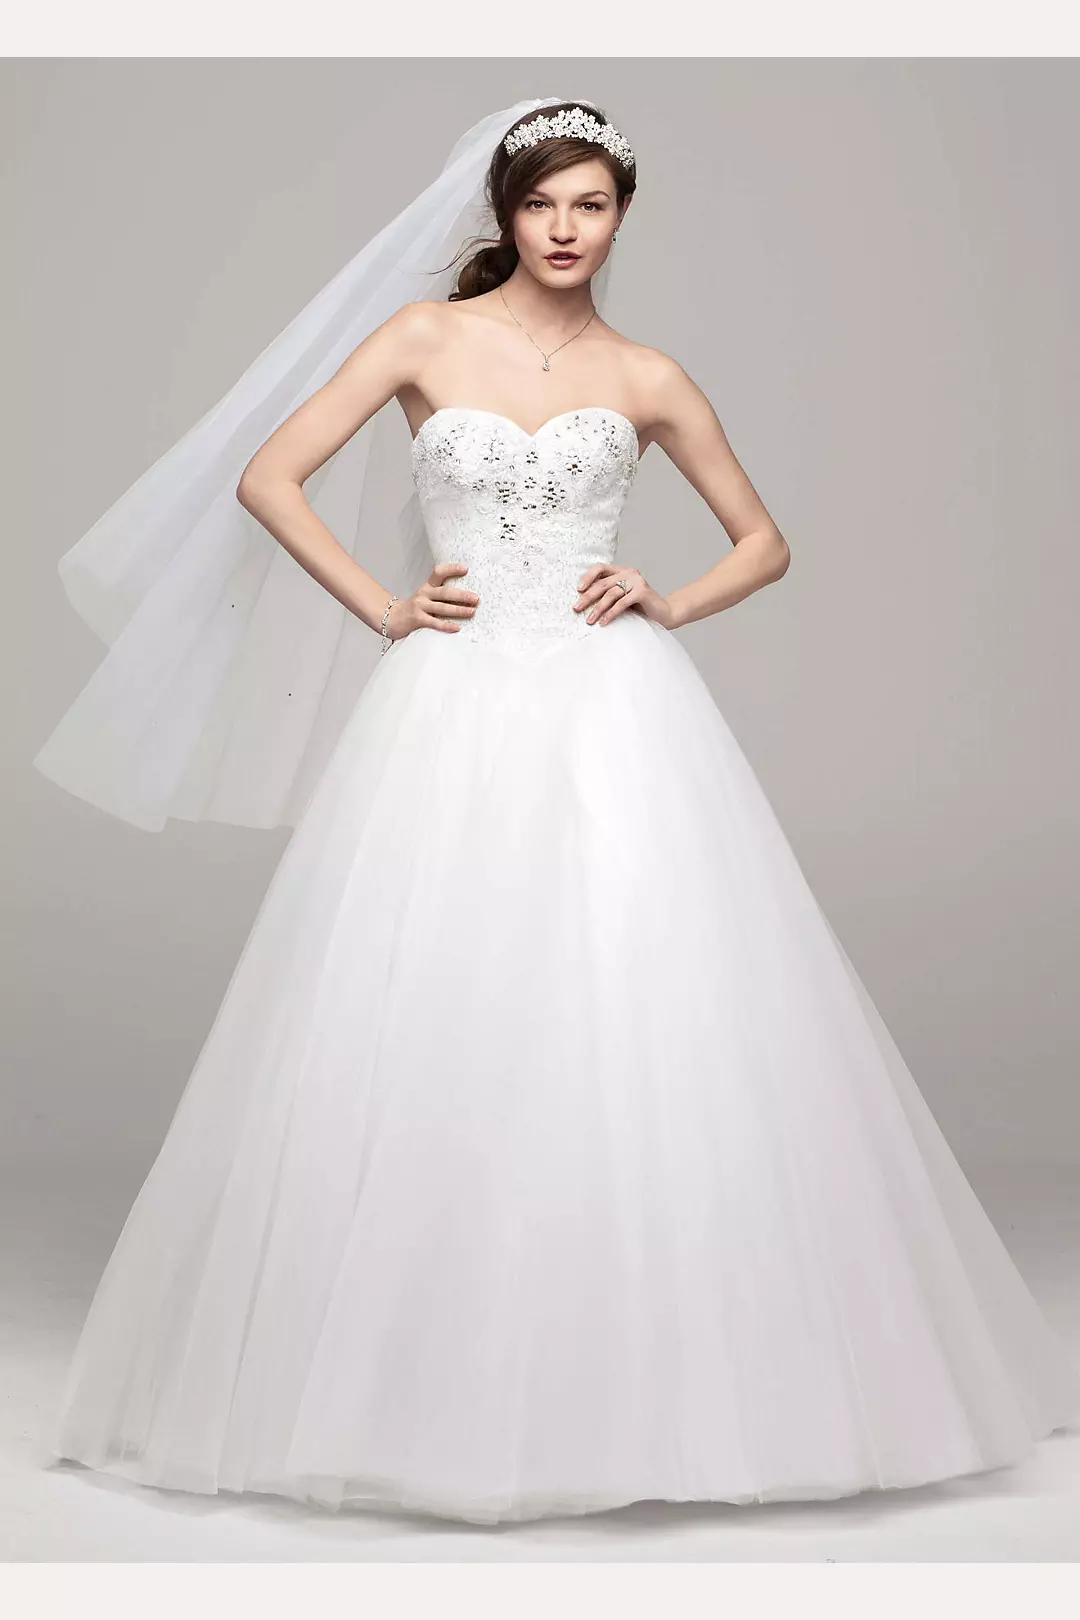 Strapless Tulle Wedding Dress with Beaded Bodice | David's Bridal